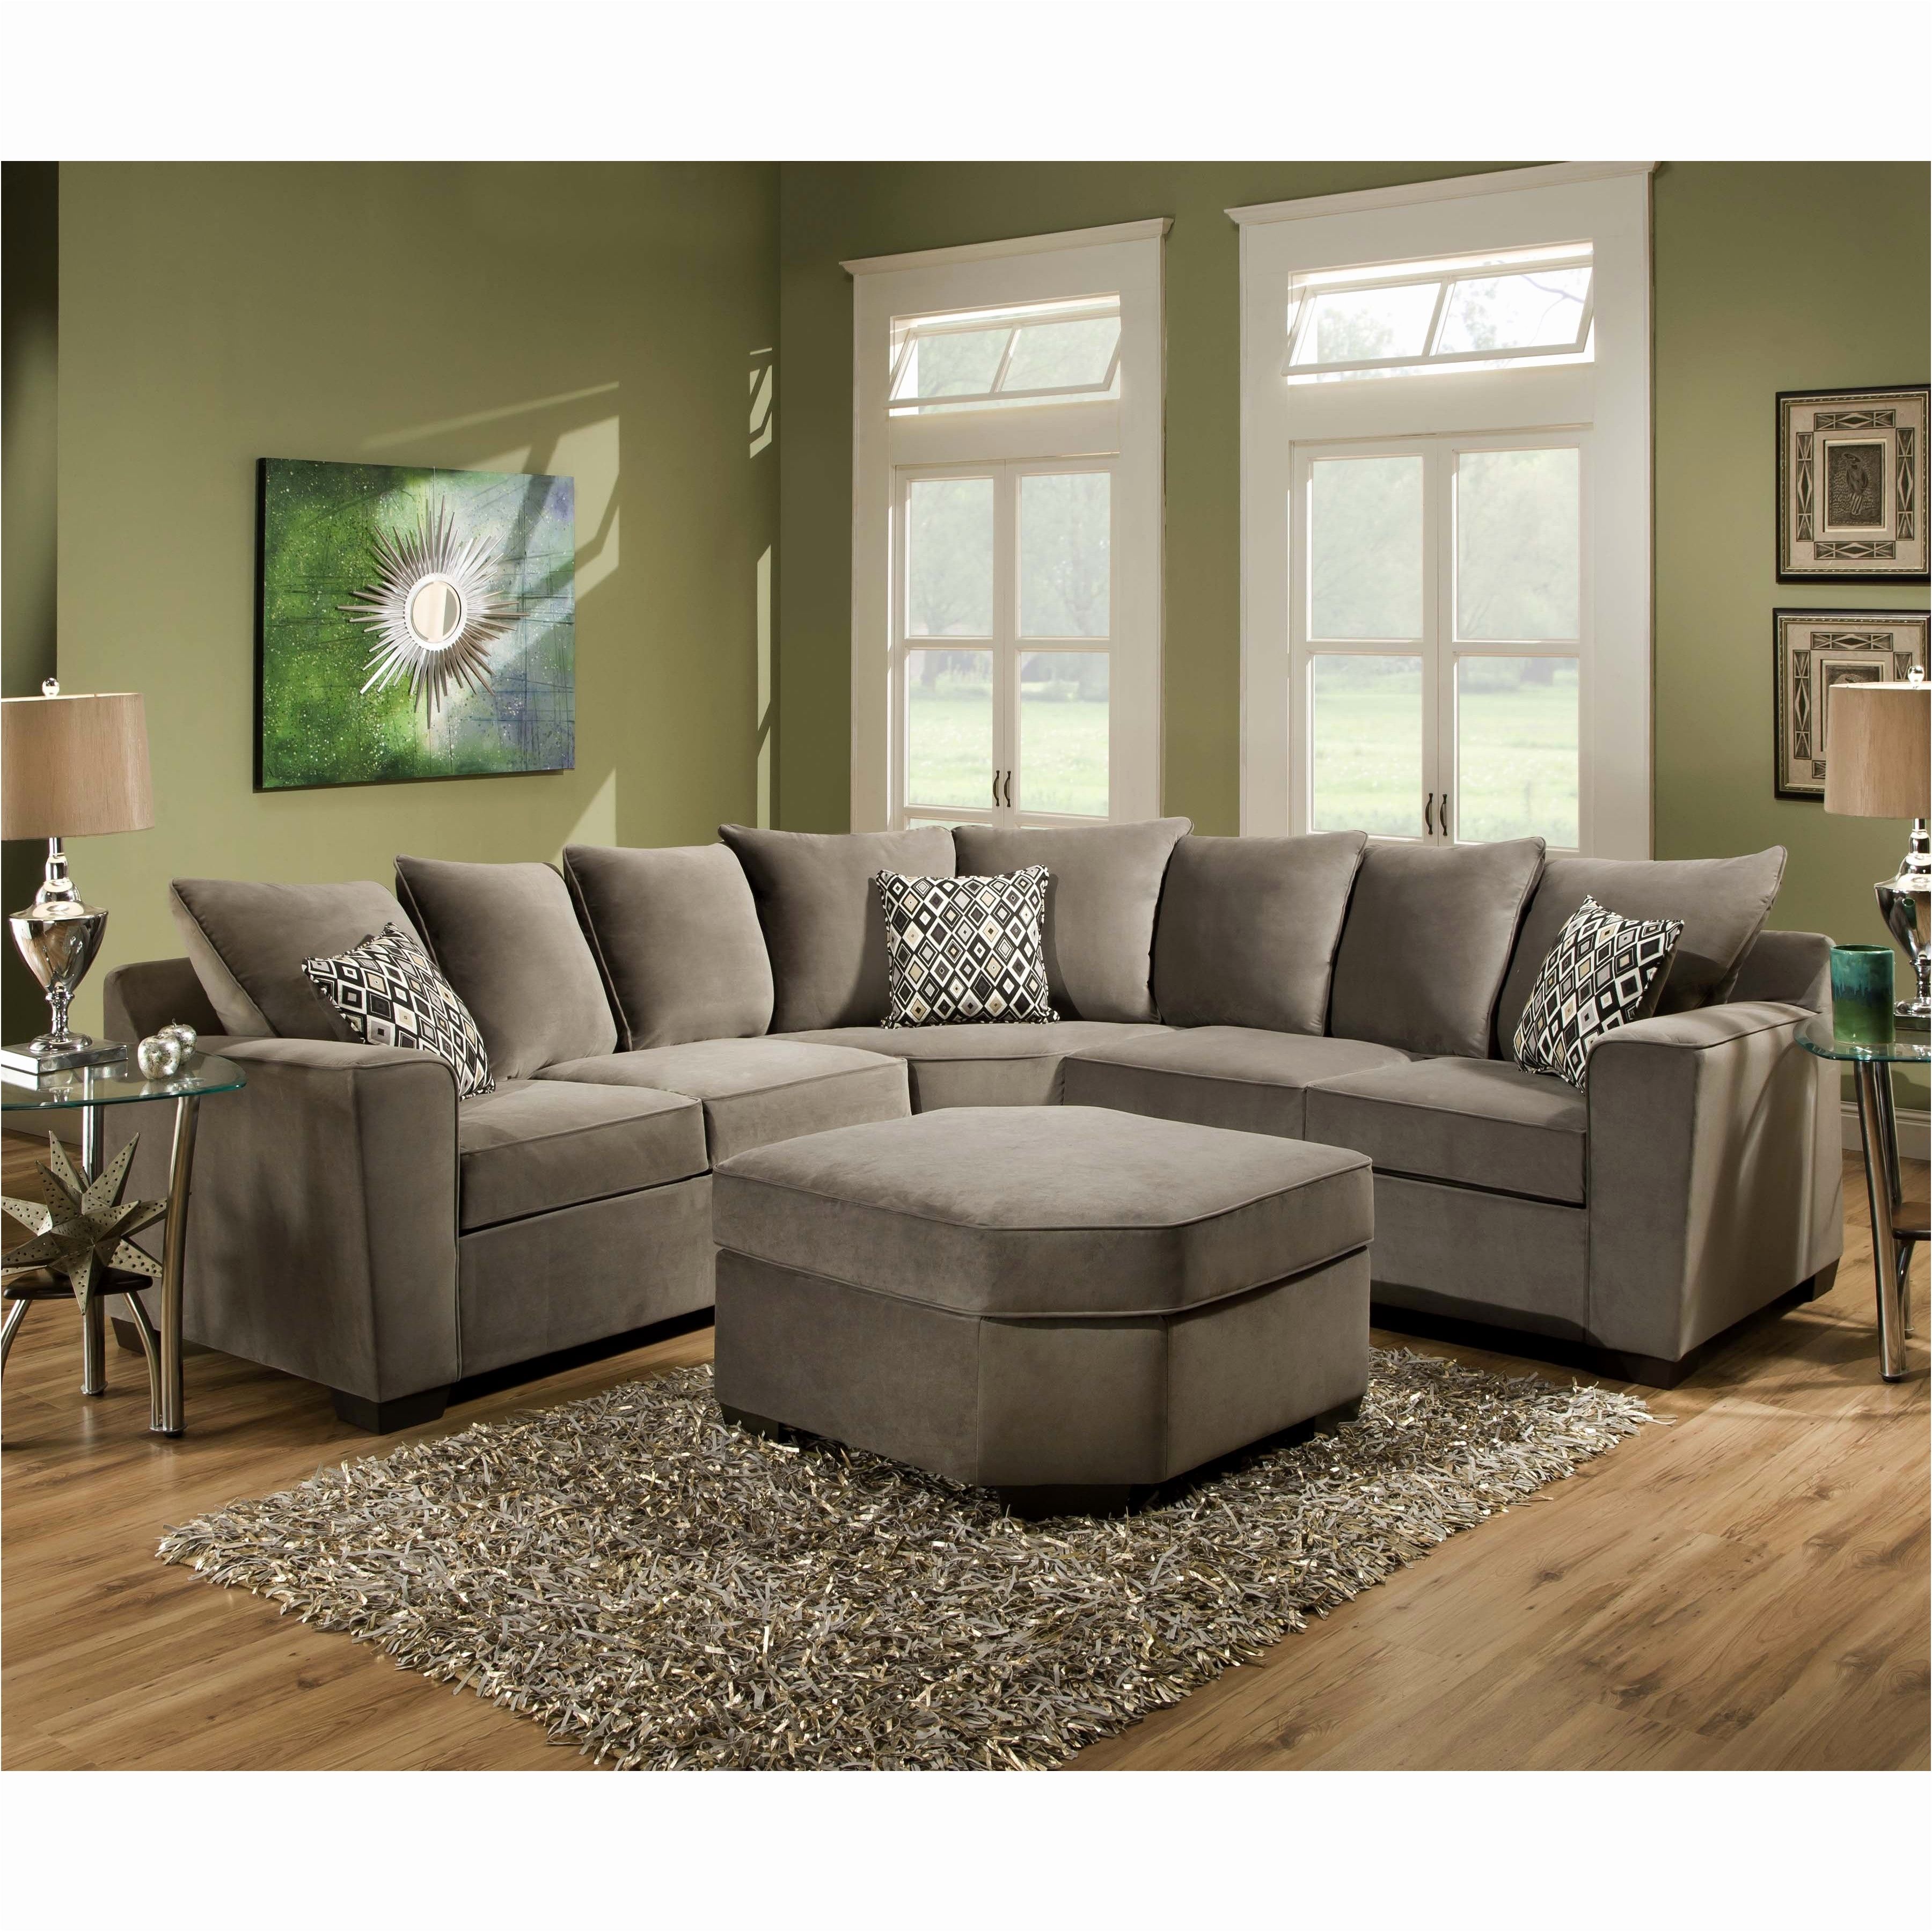 Elegant Cheap Sofas And Couches Inspirational – Intuisiblog Within Sears Sofas (View 9 of 10)